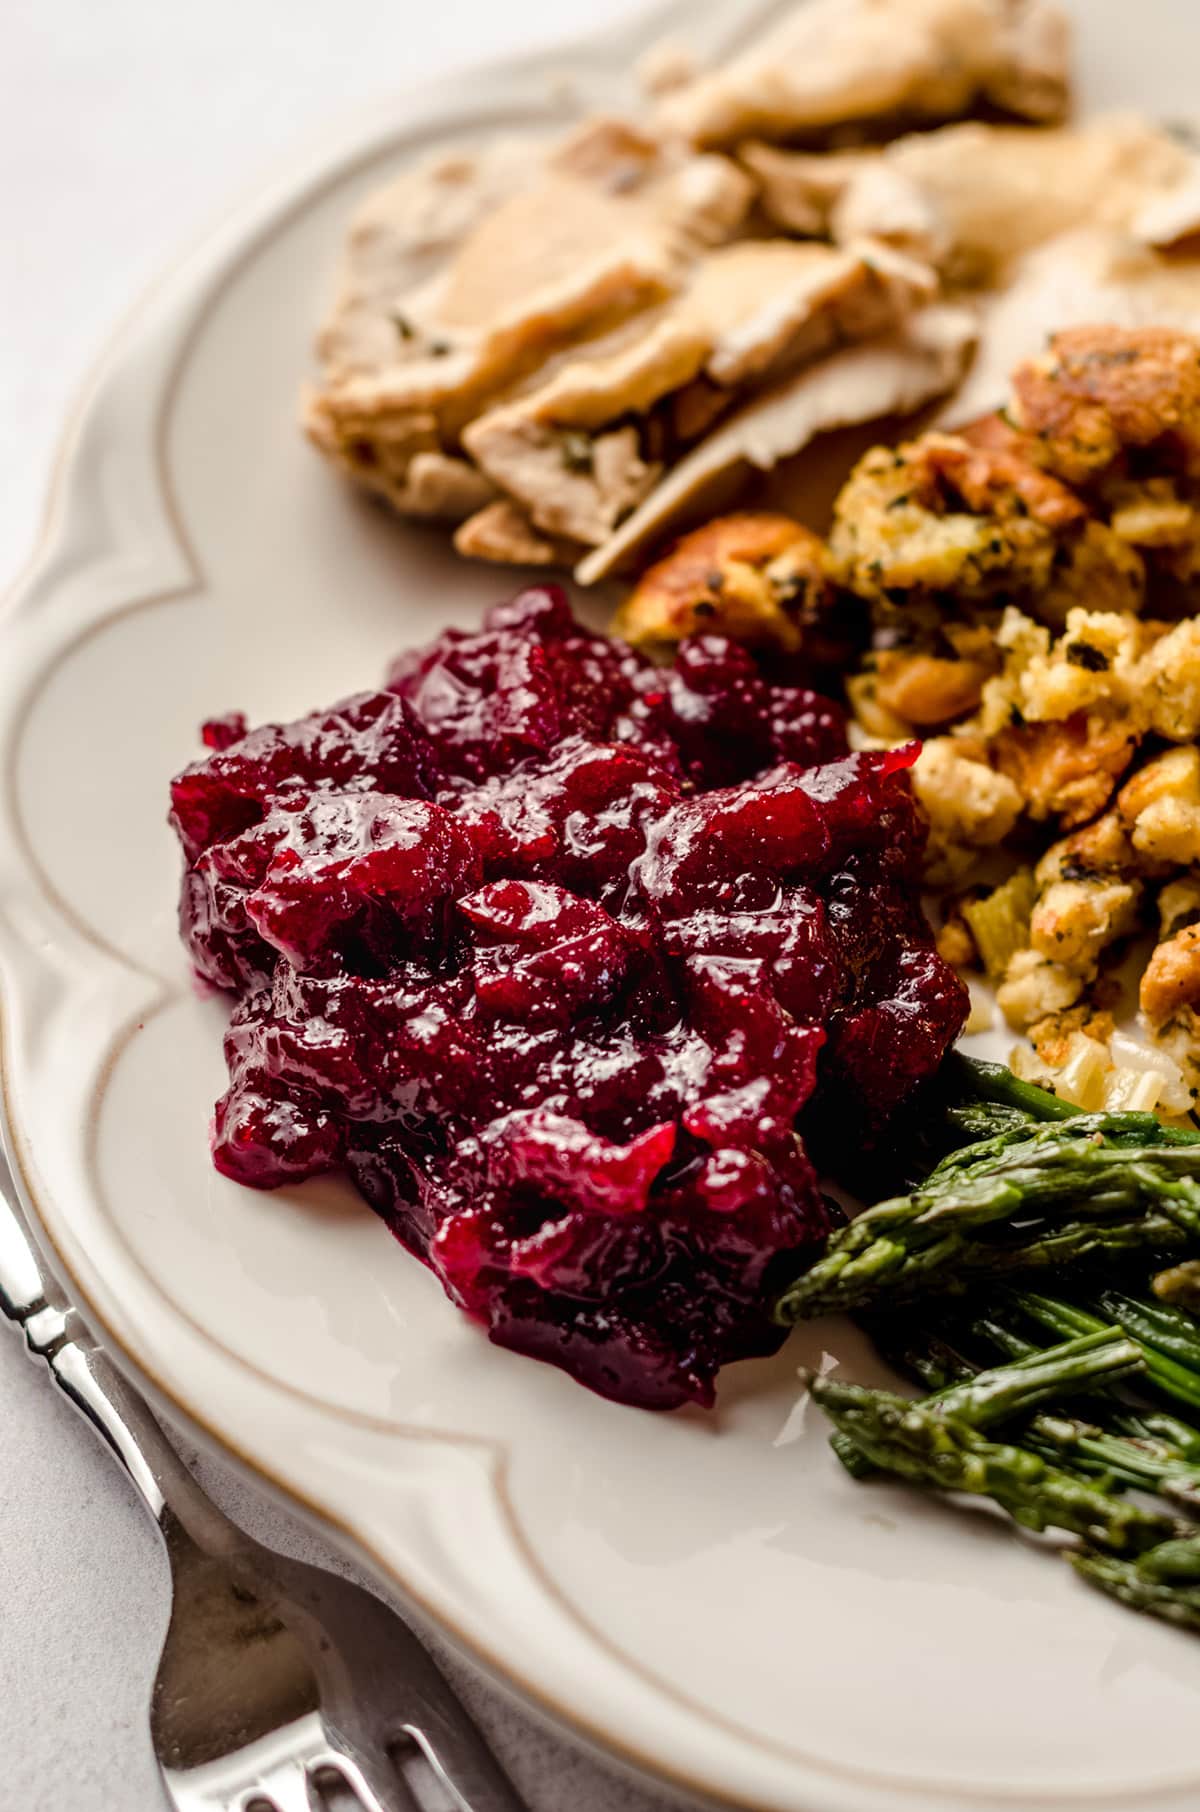 spiced cranberry sauce on a plate with thanksgiving sides